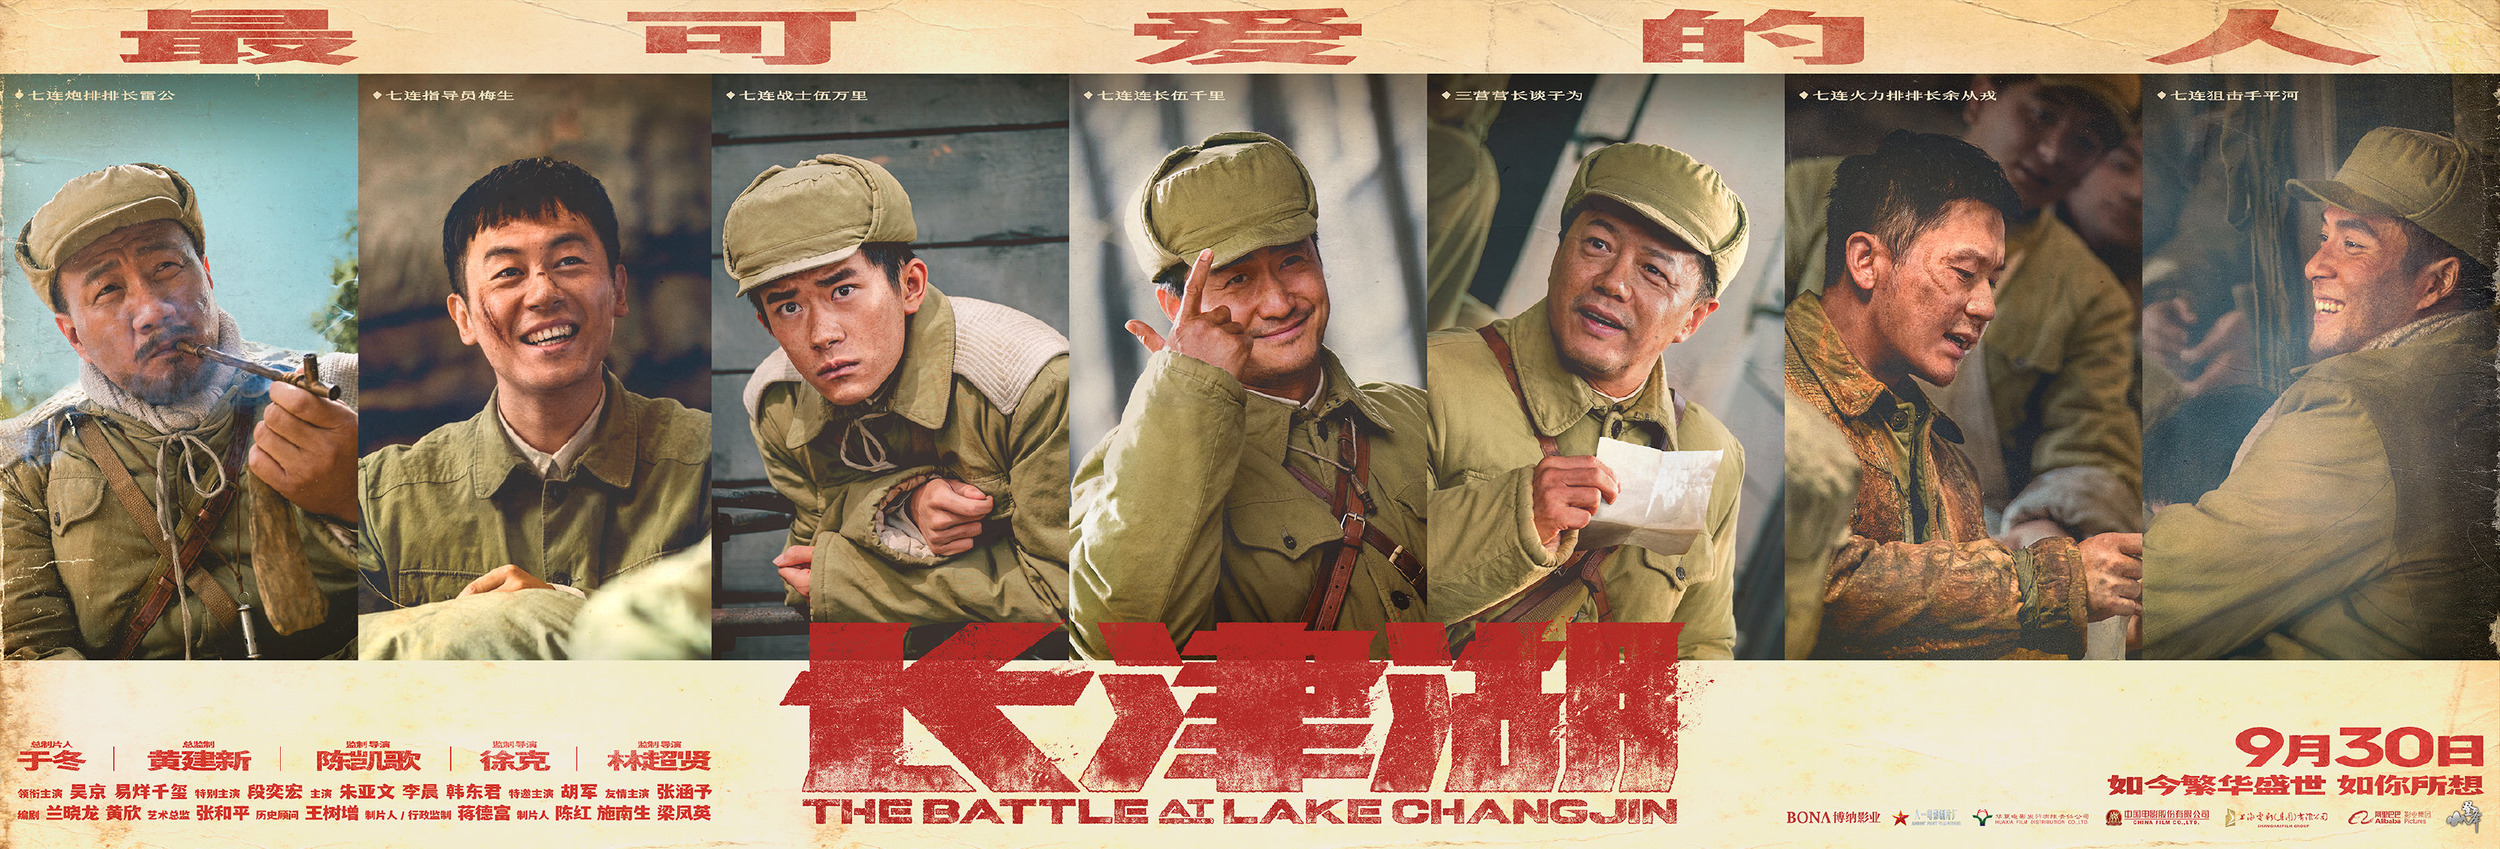 Mega Sized Movie Poster Image for The Battle at Lake Changjin (#18 of 24)